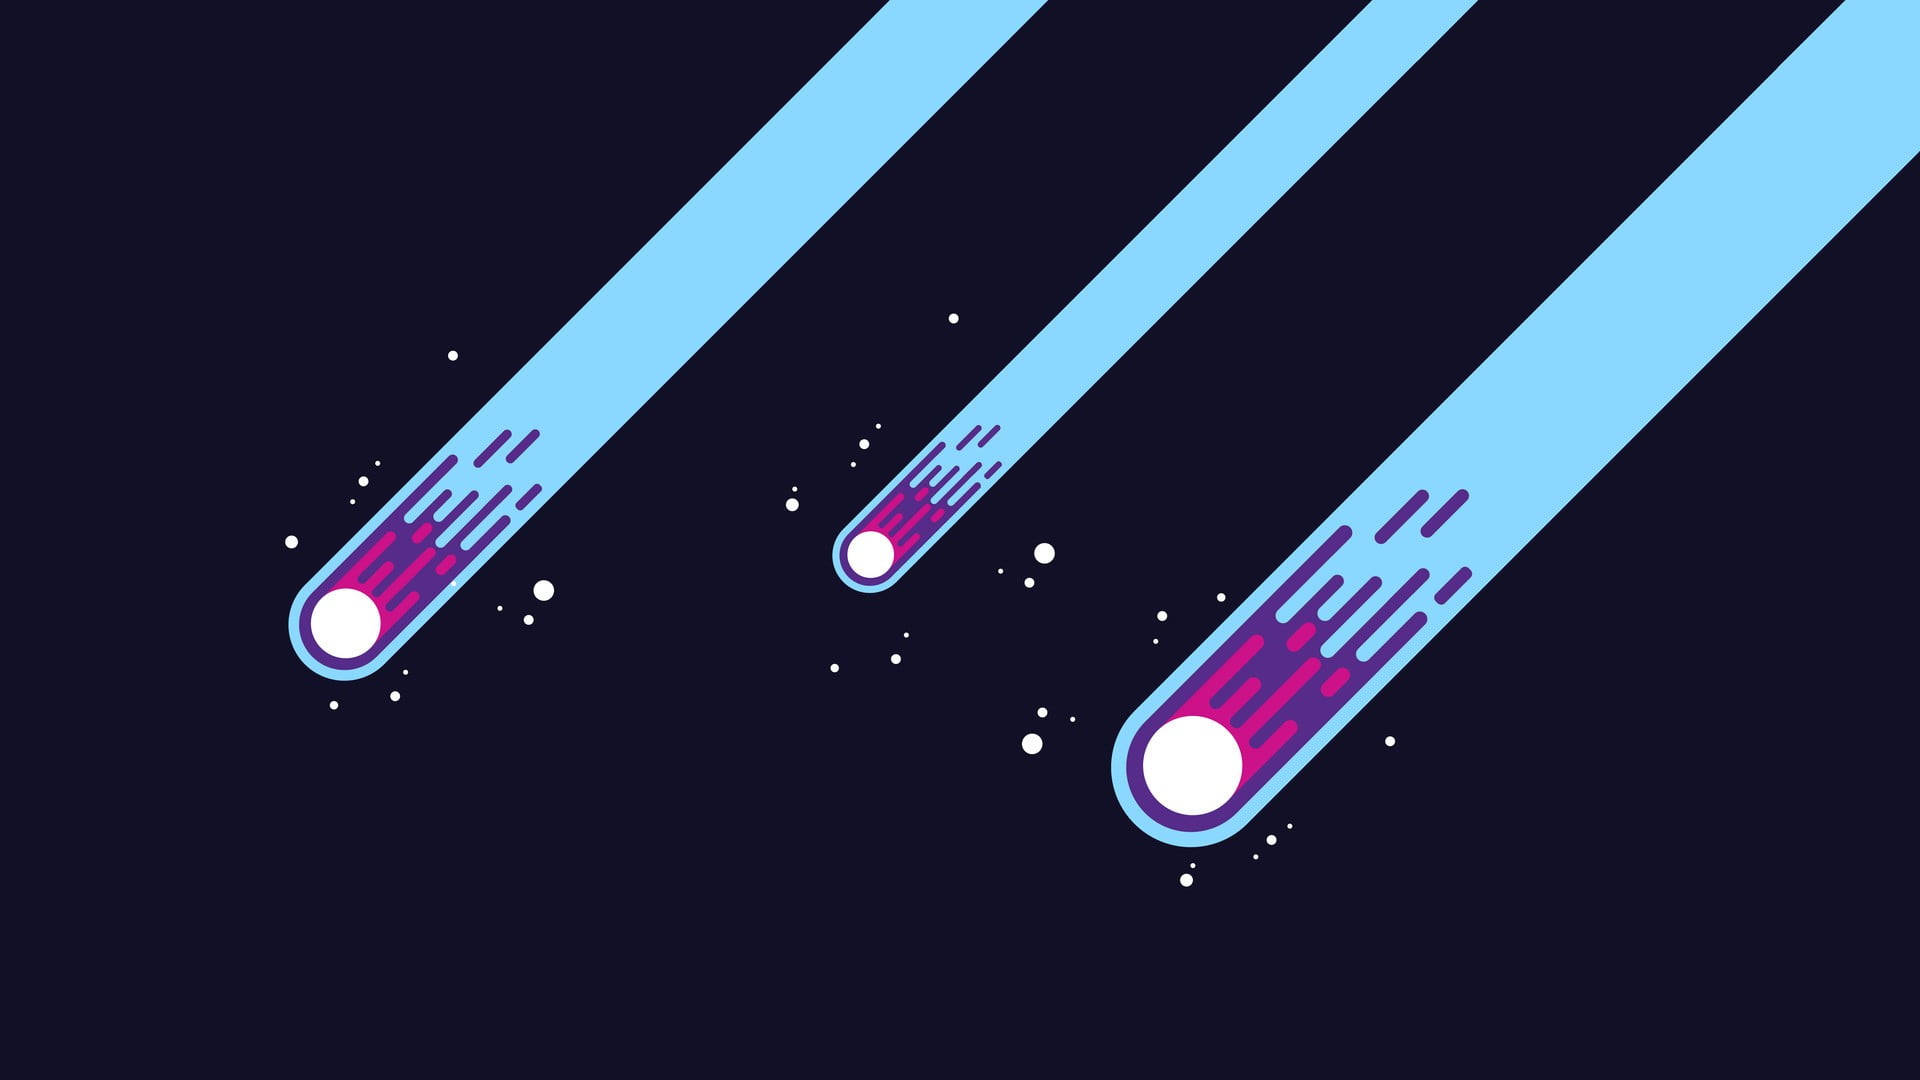 Watch Shooting Stars In Outer Space On This Dynamic Design Background